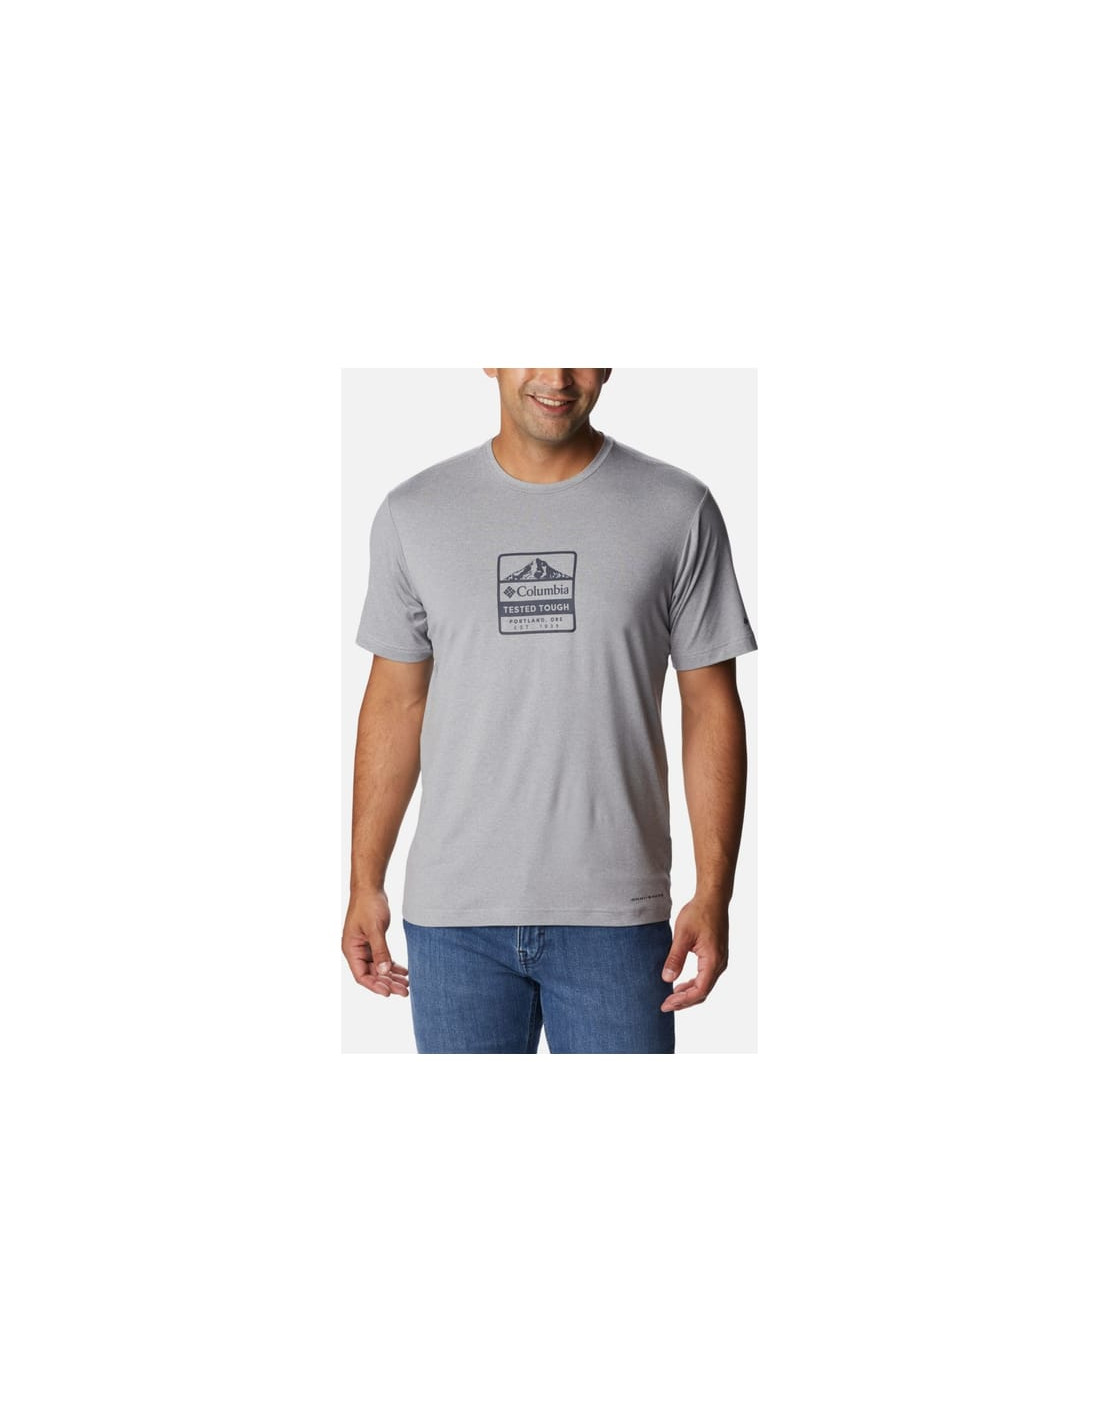 TECH TRAIL FRONT GRAPHIC SS TEE